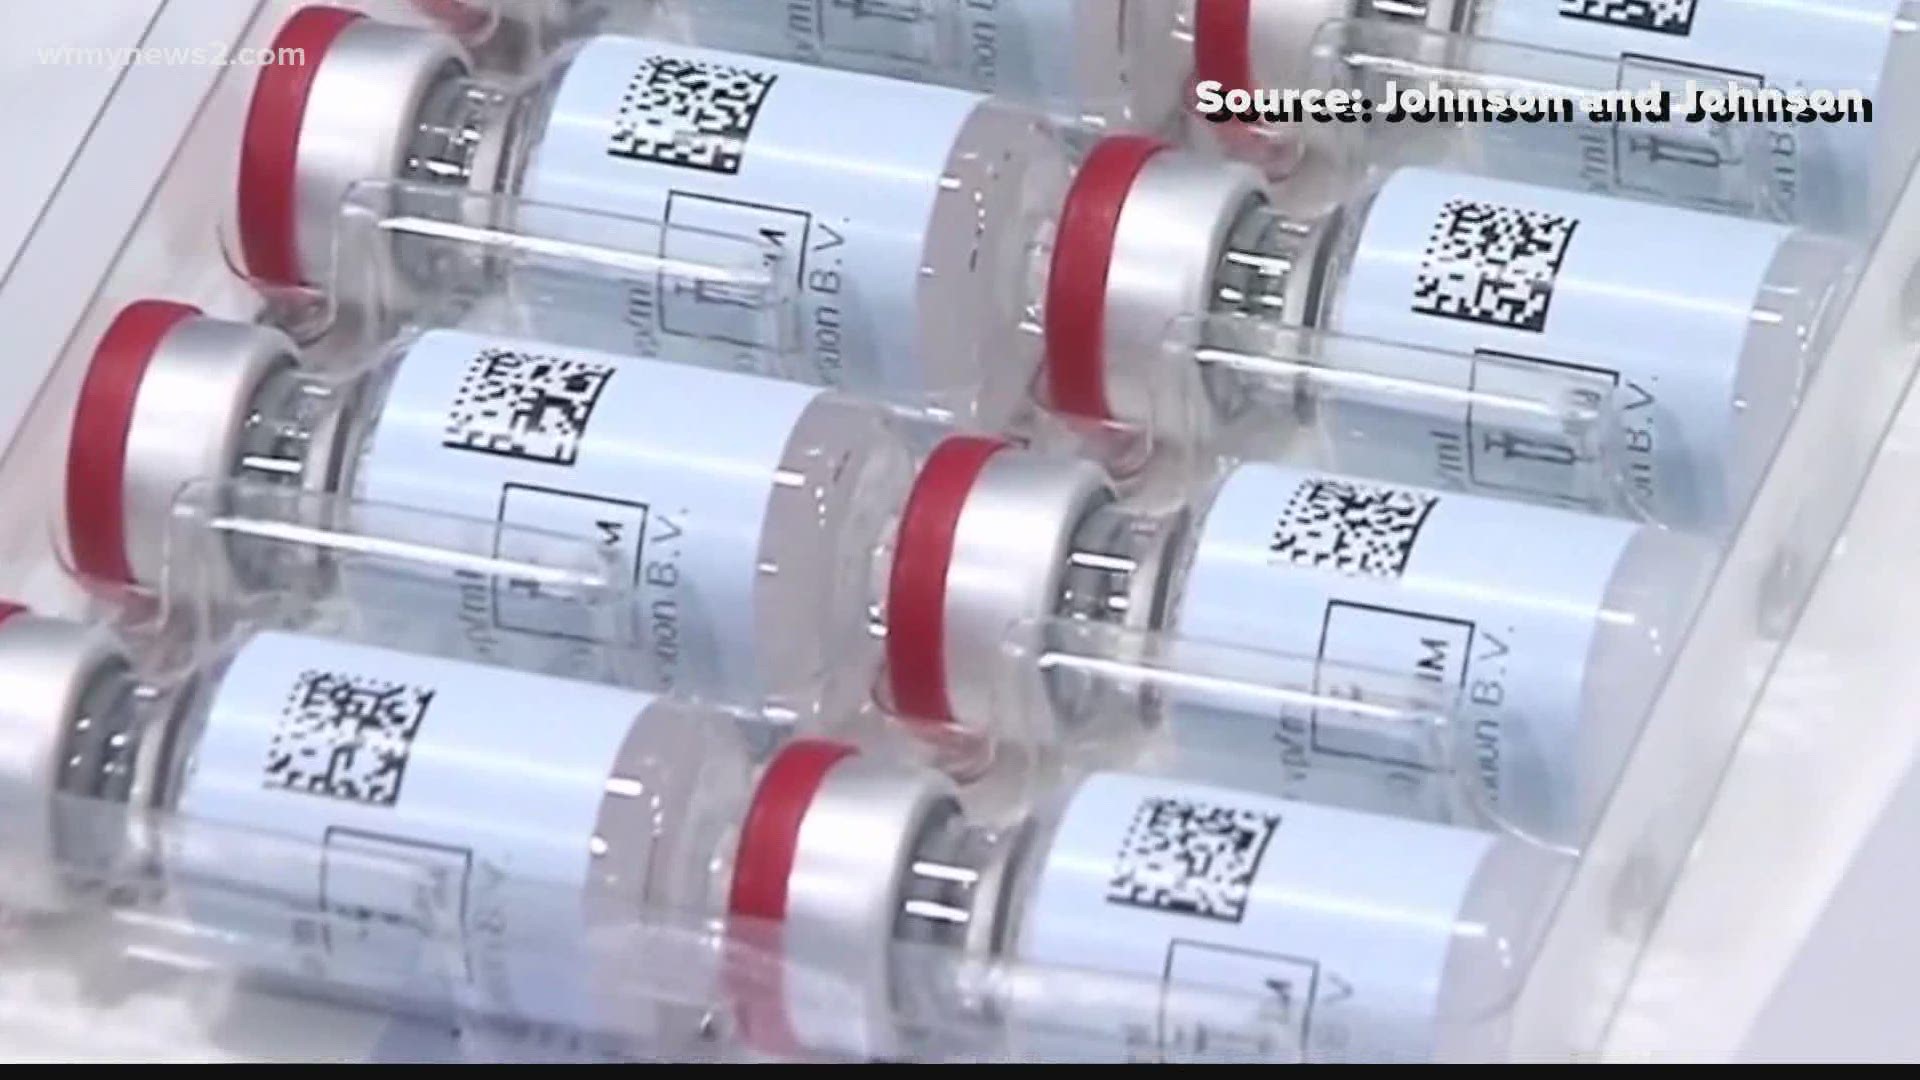 North Carolina is expecting more than 80,000 doses of the newly approved vaccine by Wednesday.